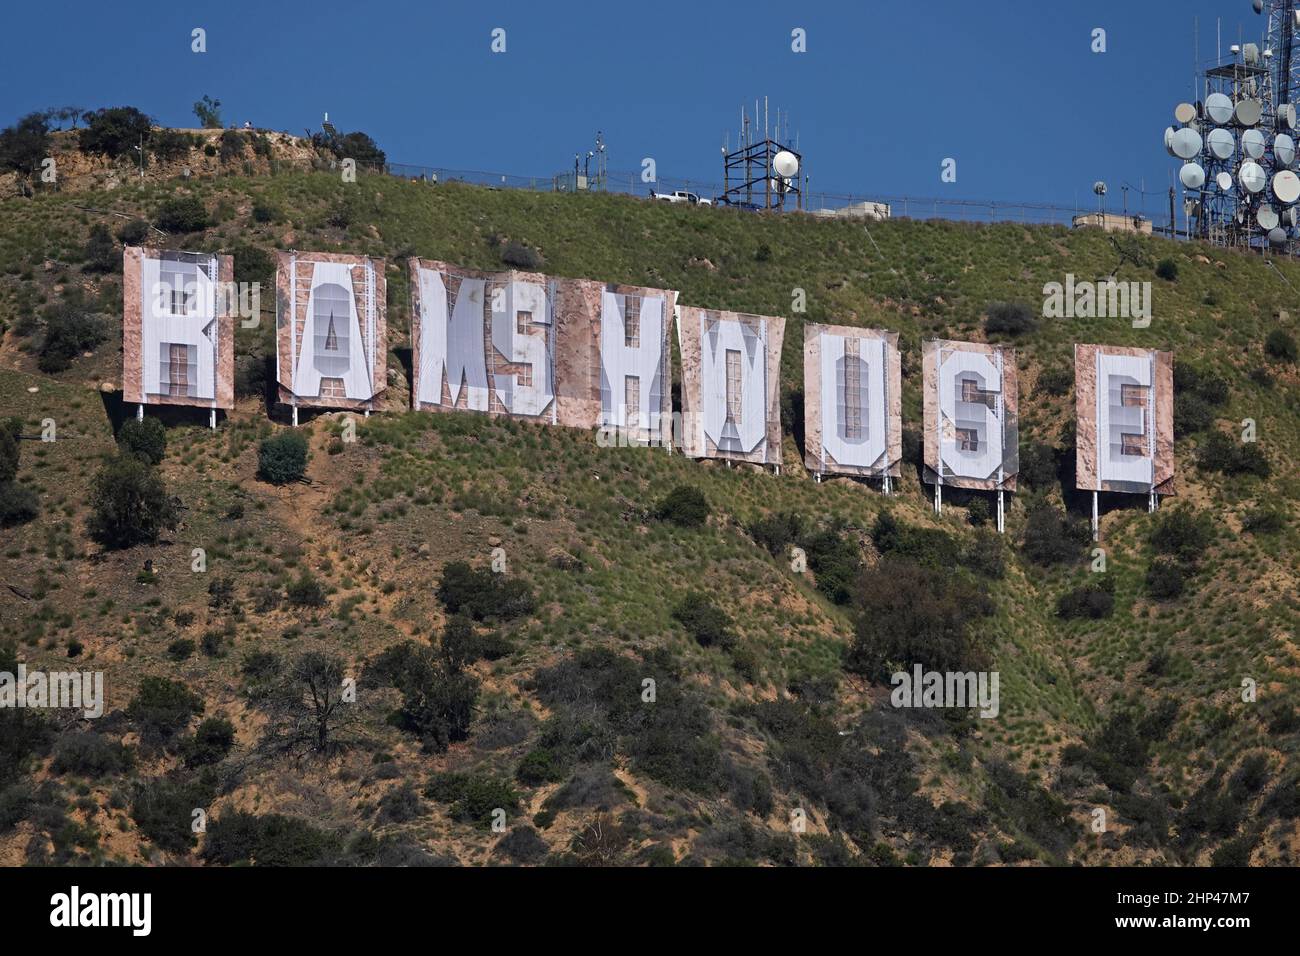 Hollywood, CA / USA - Feb. 16, 2022: Banners spelling out RAMS HOUSE are shown up close, covering the letters of the iconic Hollywood sign. Stock Photo